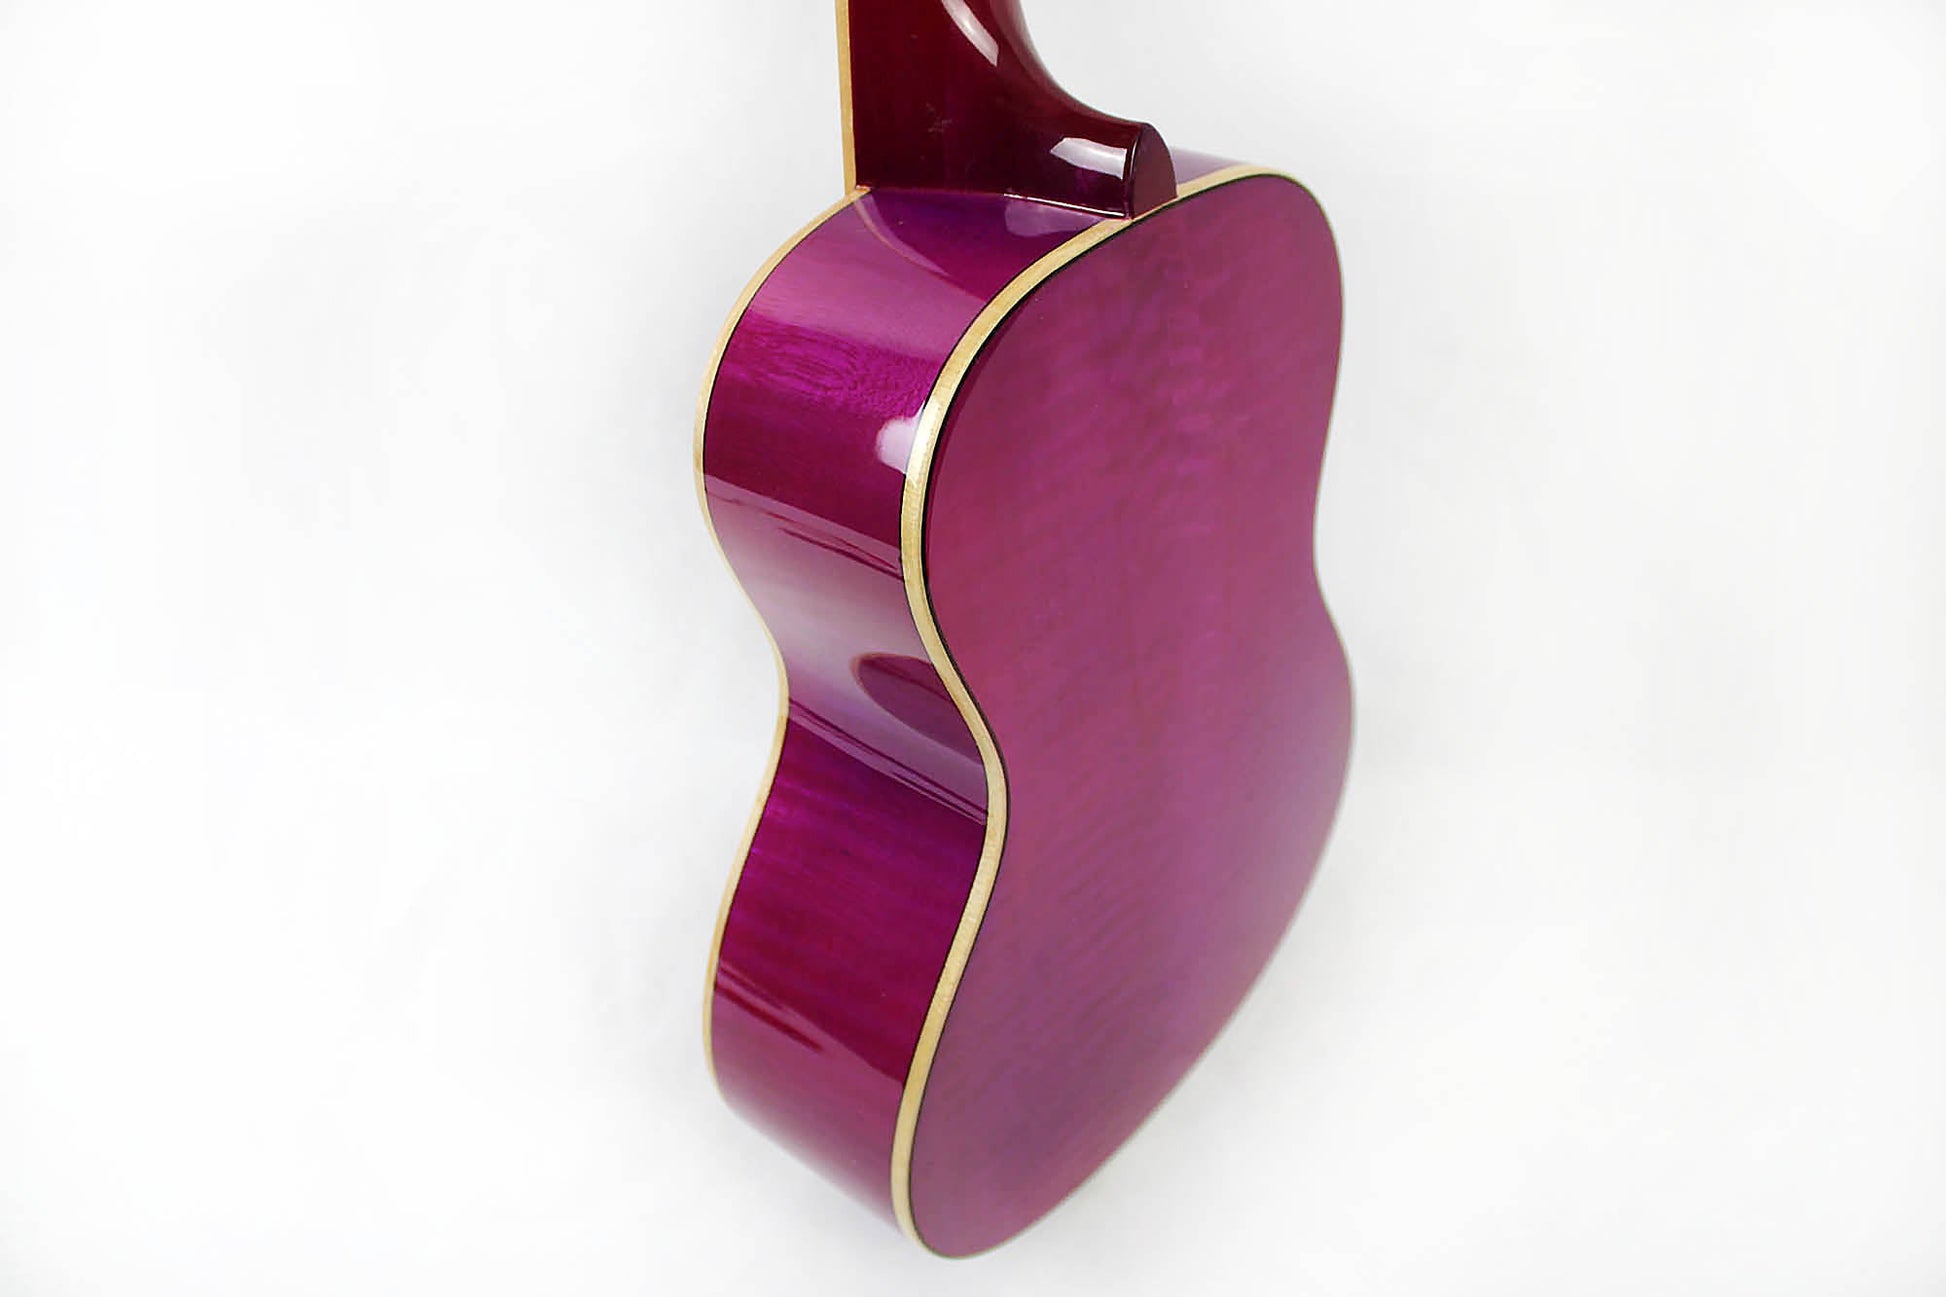 This is the back of the body and neck of an Amahi PGUK555PUC Flamed Maple Concert Ukulele- purple.